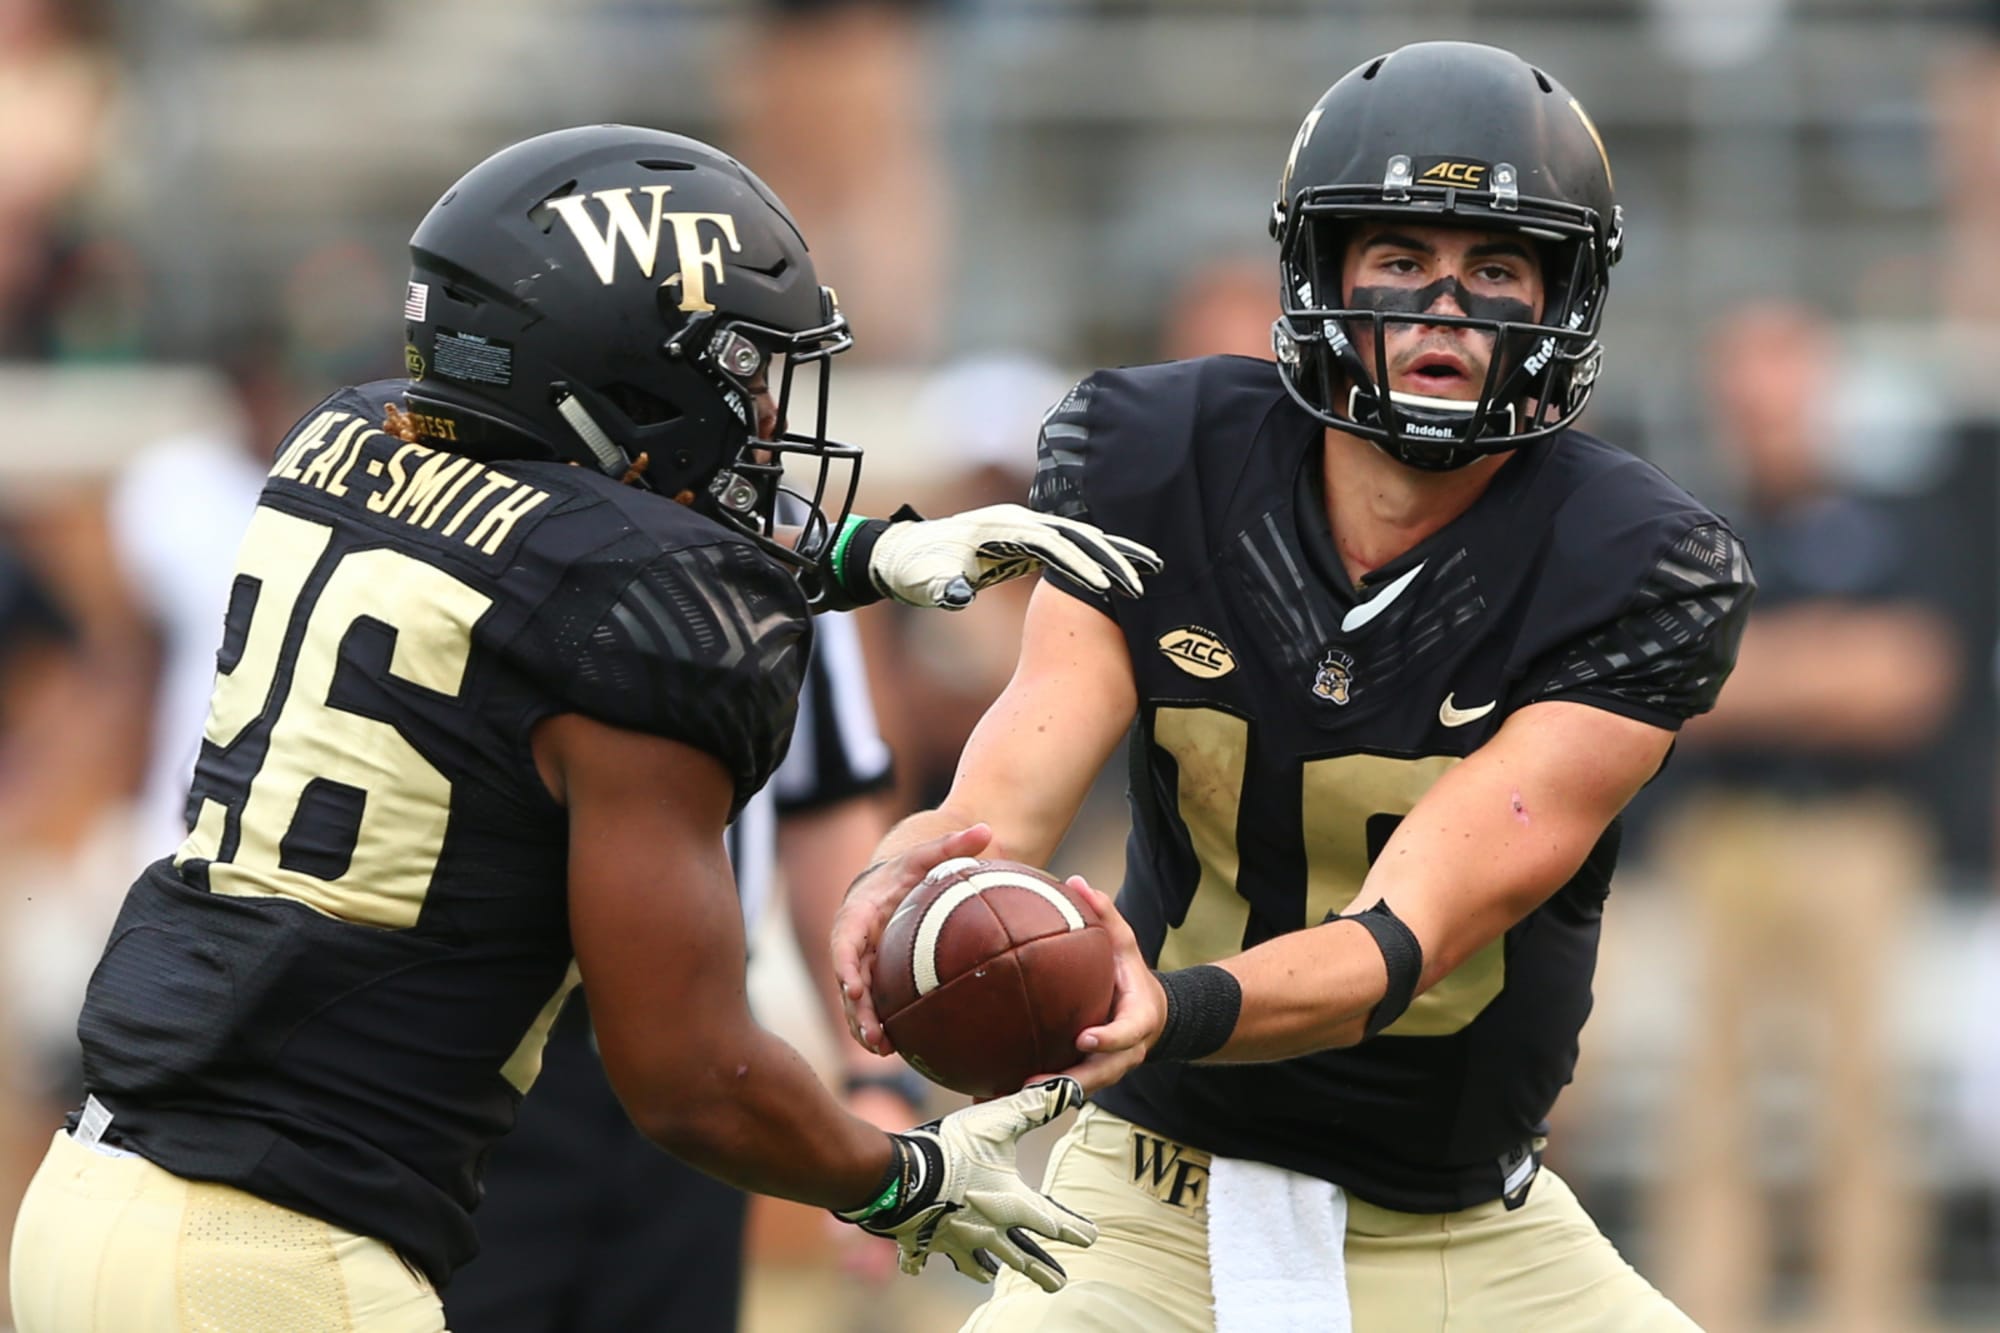 Wake Forest Football 3 takeaways from blowout win over Campbell